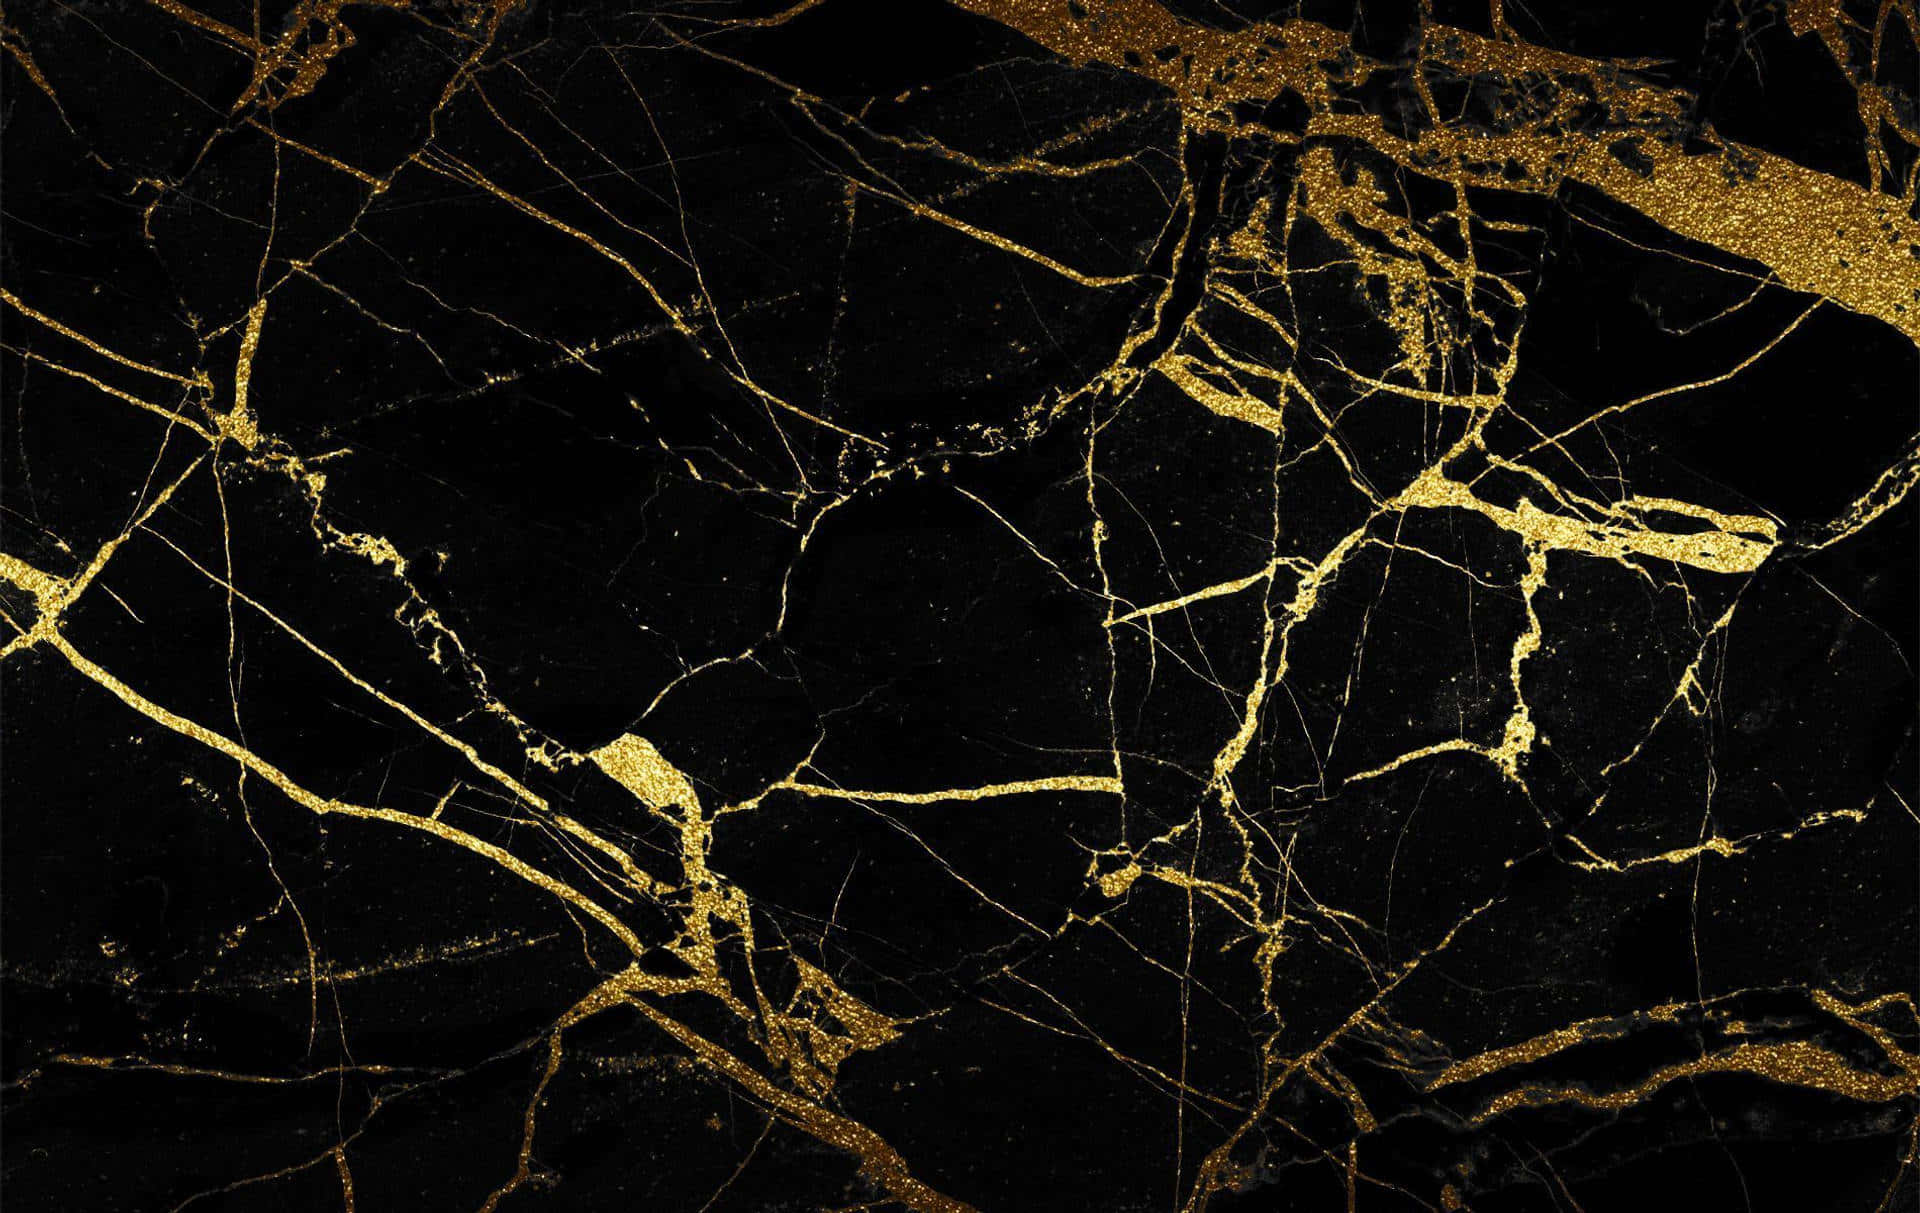 A regal black and gold aesthetic to bring an aura of luxury and class to your home. Wallpaper